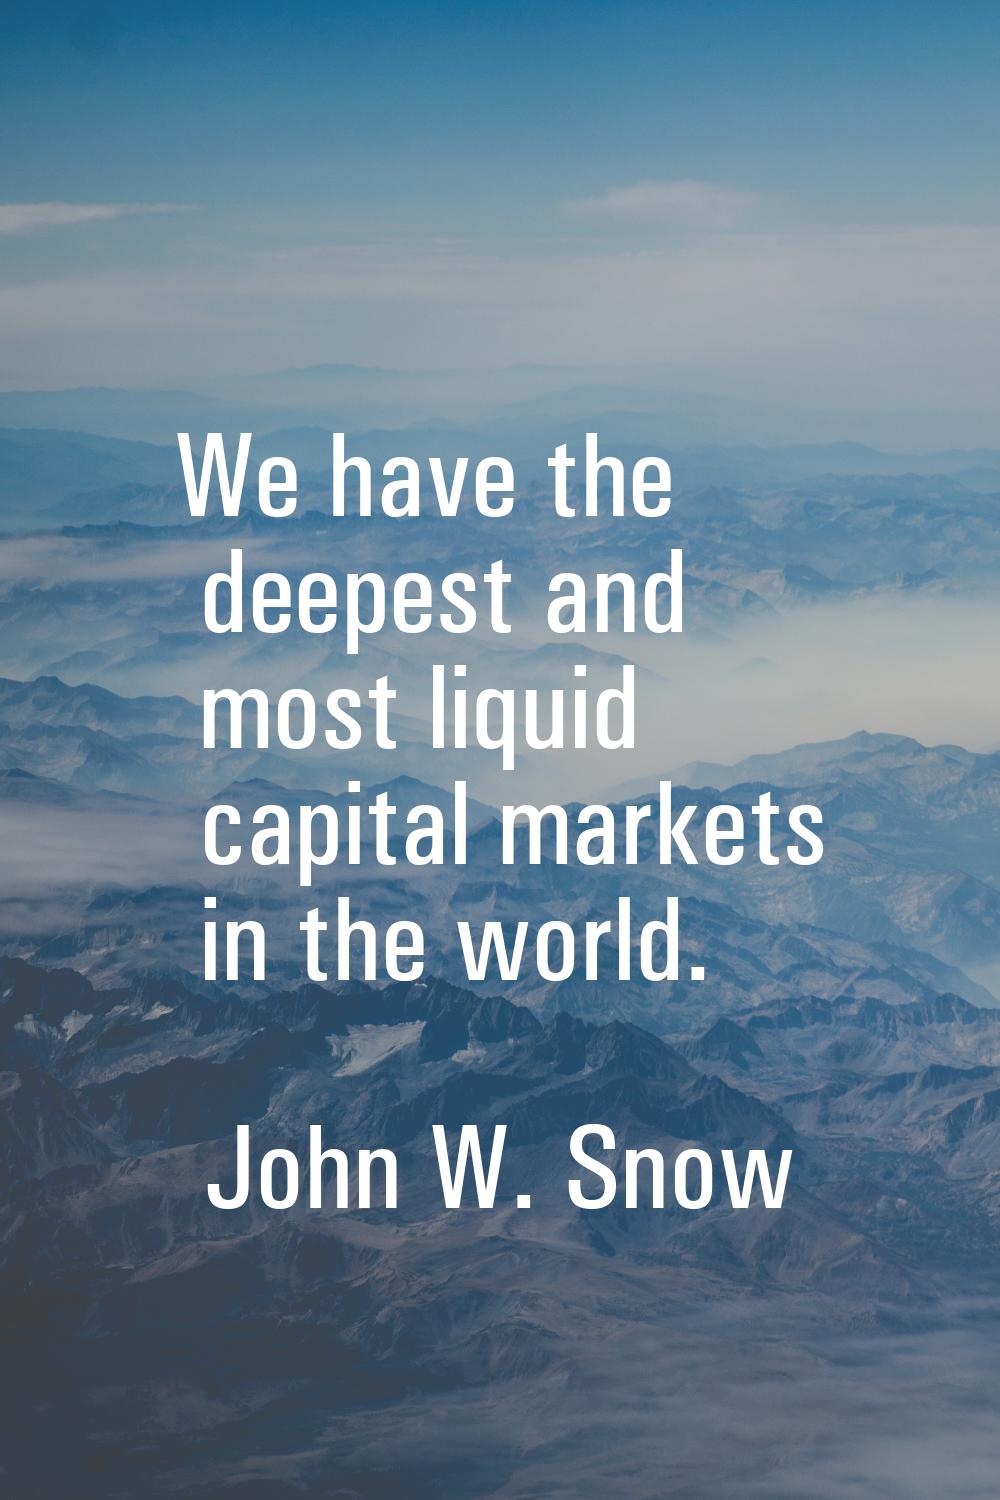 We have the deepest and most liquid capital markets in the world.